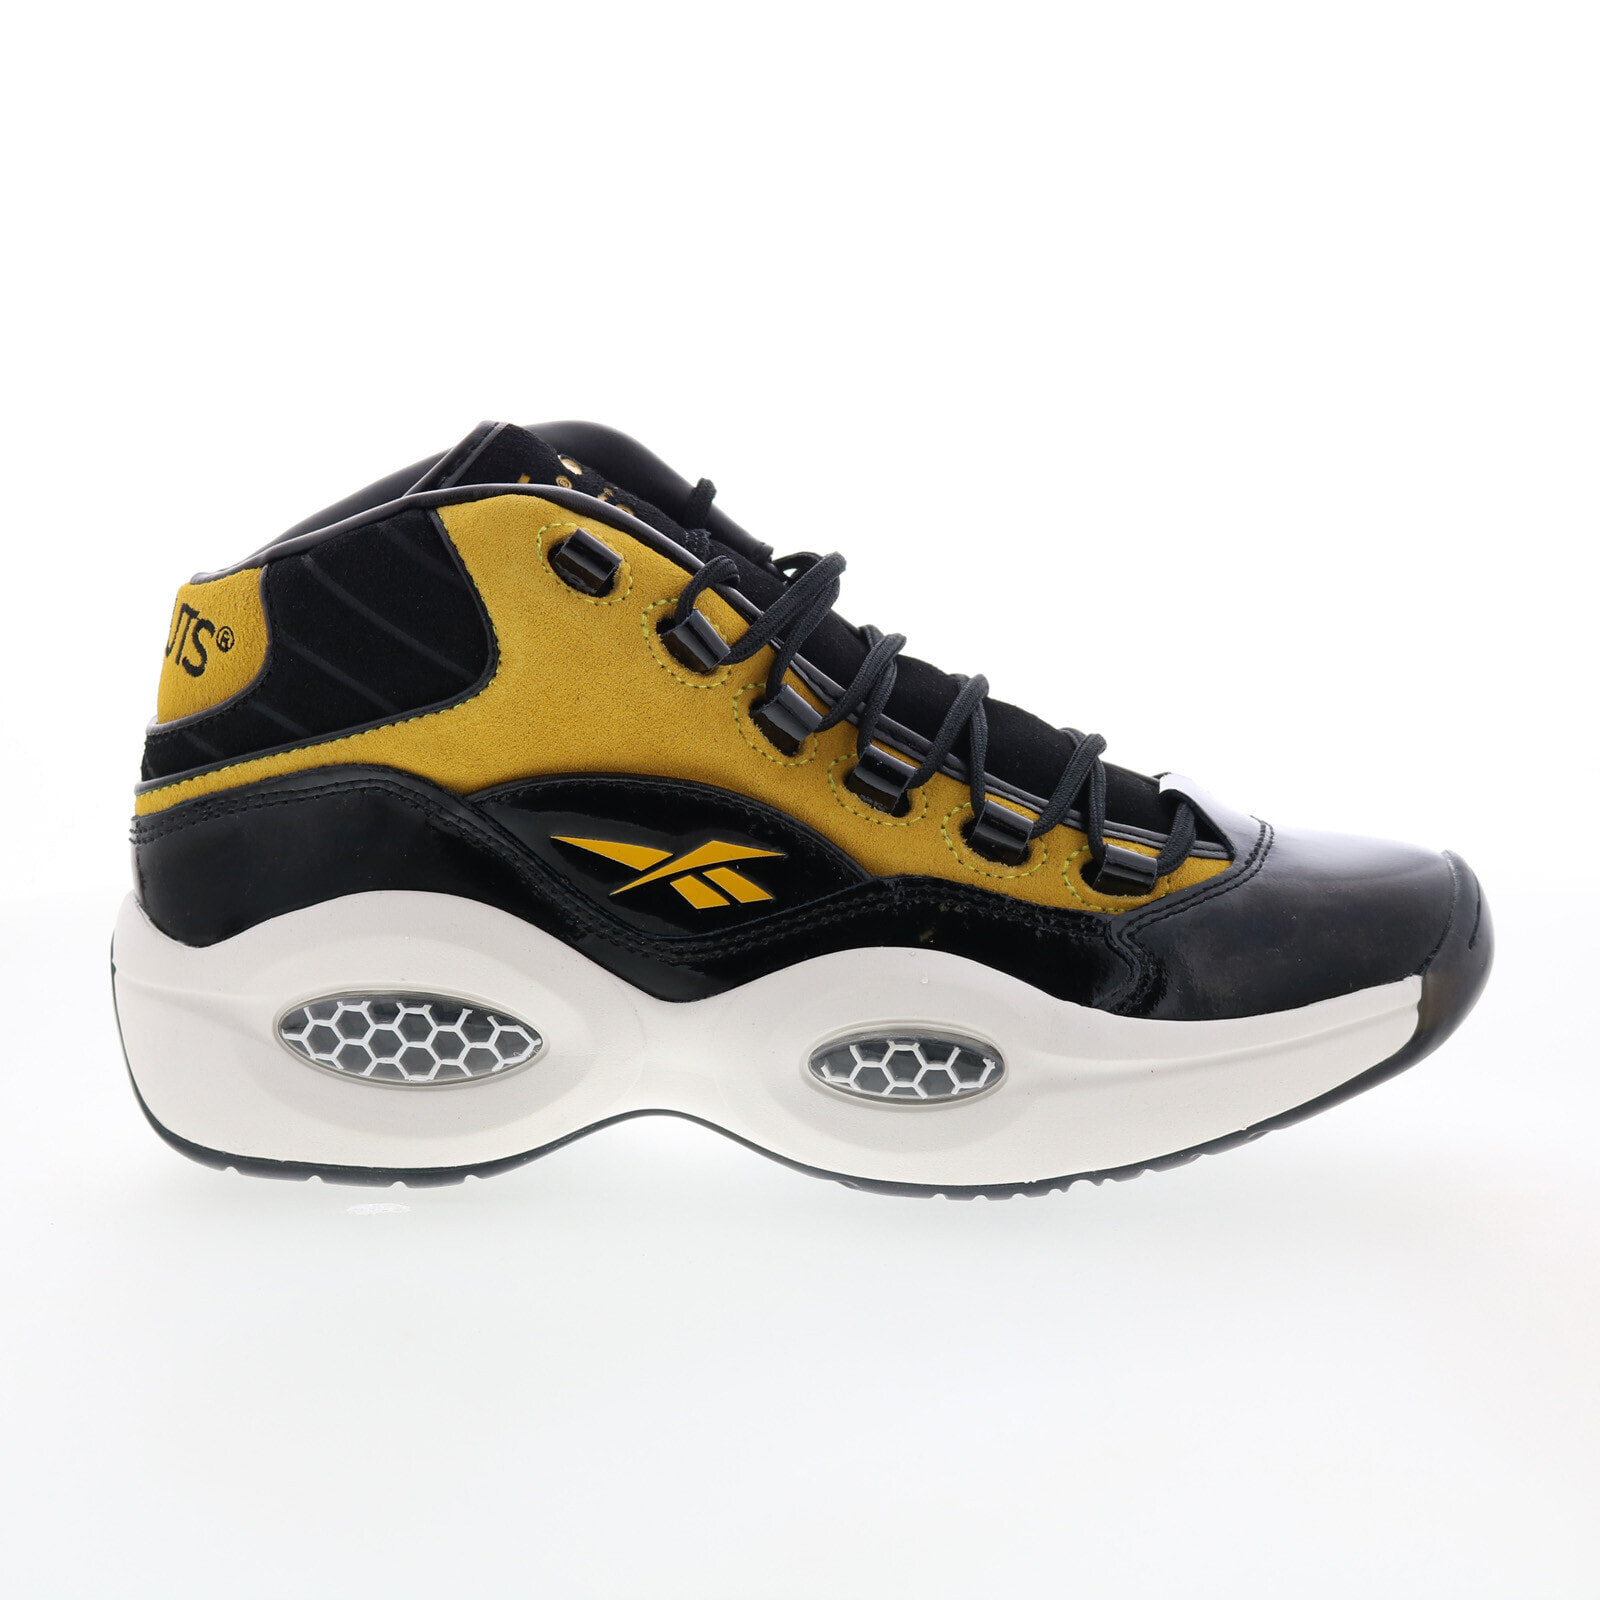 Reebok Question Mid GW1405 Mens Black Leather Athletic Basketball Shoes